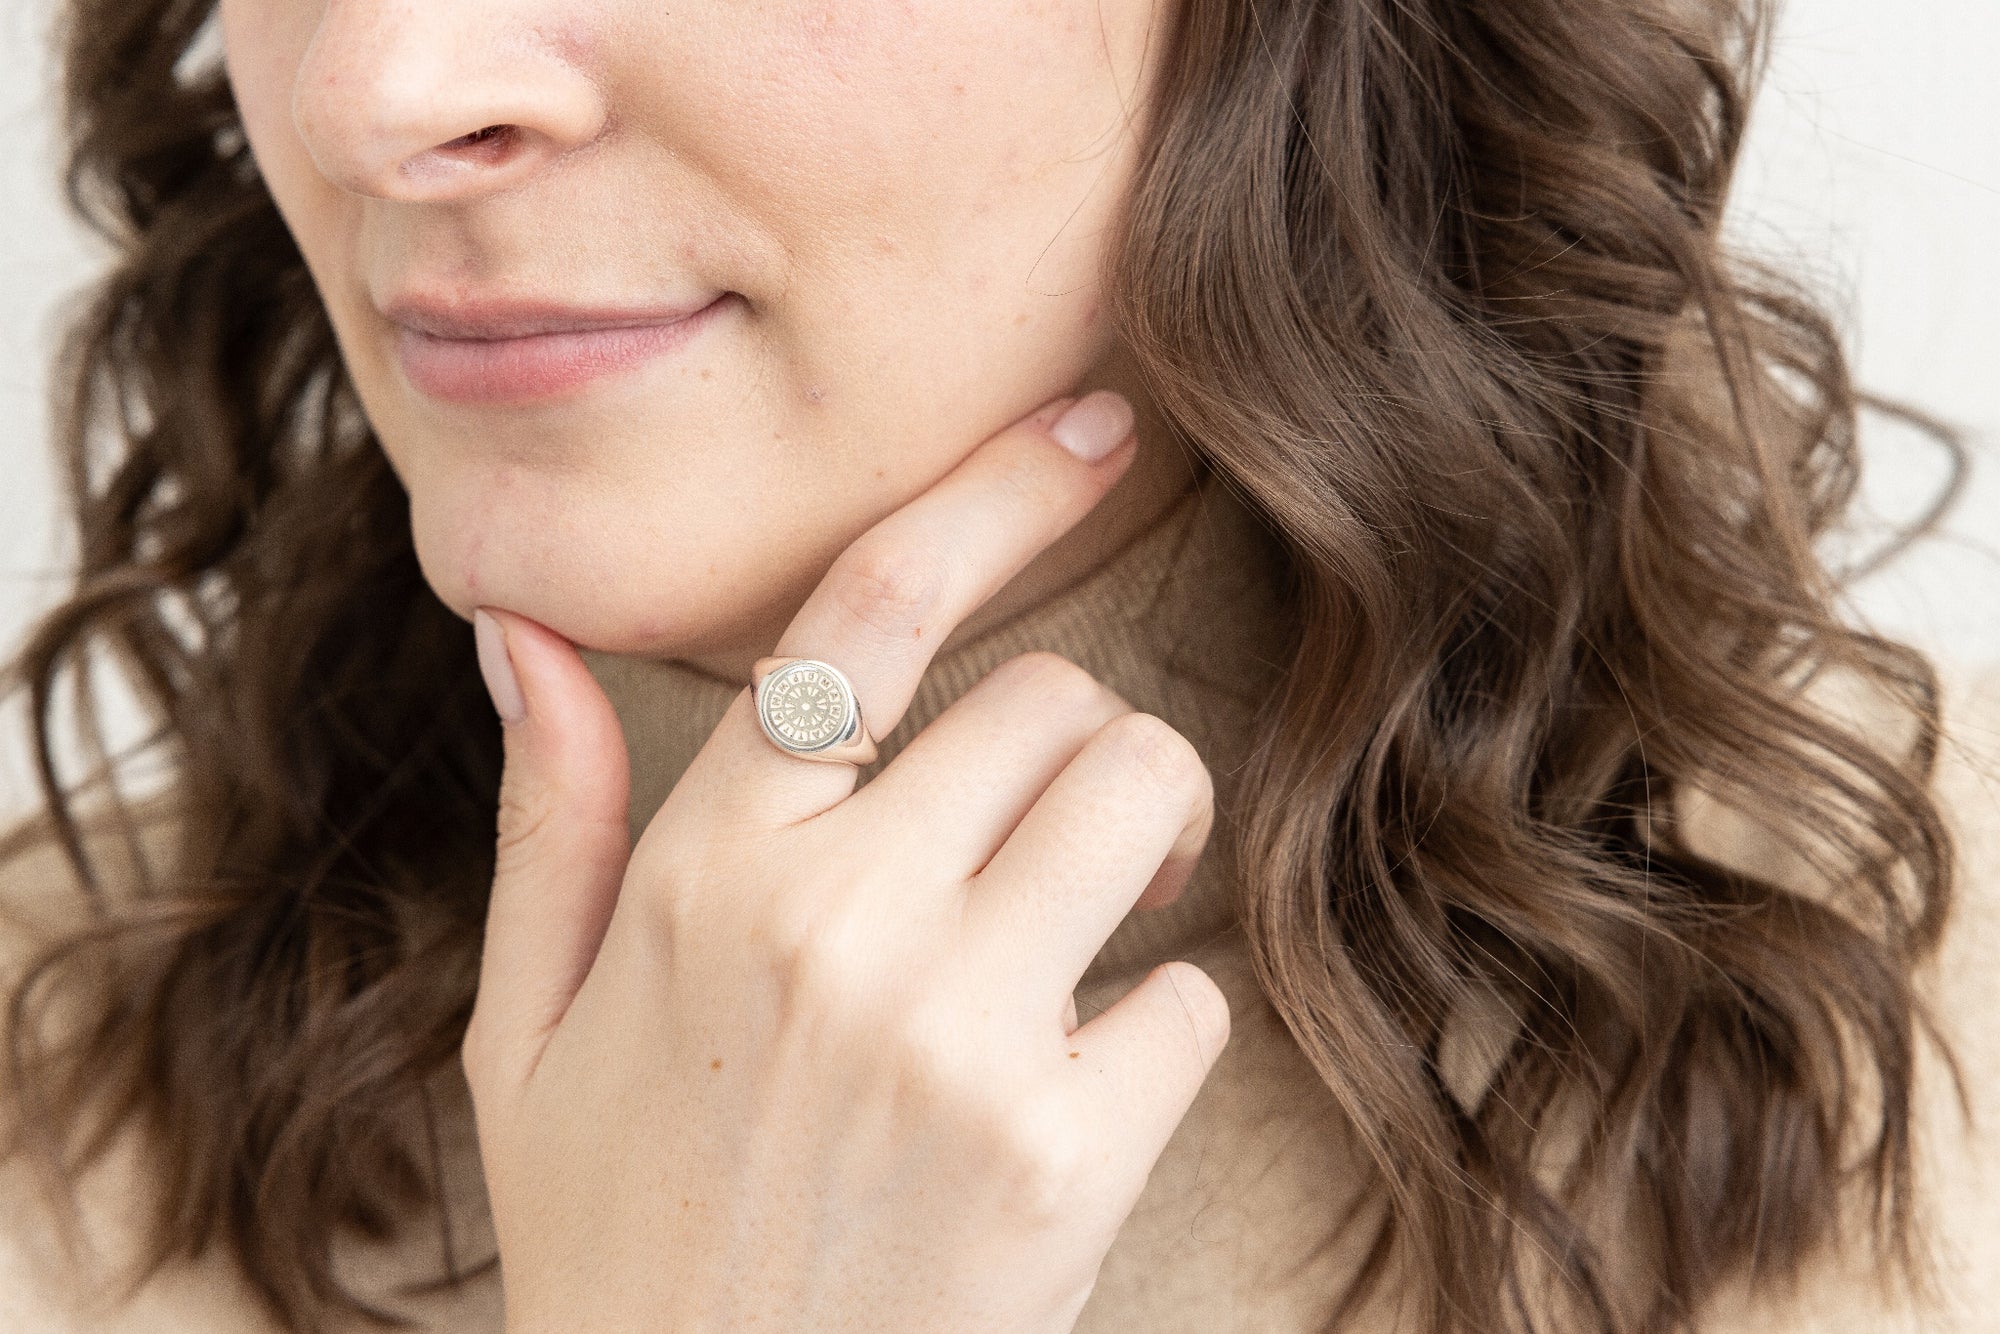 A side view of a smiling woman with wavy hair, touching her chin with a hand featuring a 12mm silver Manhattan Mini Manhole signet ring.